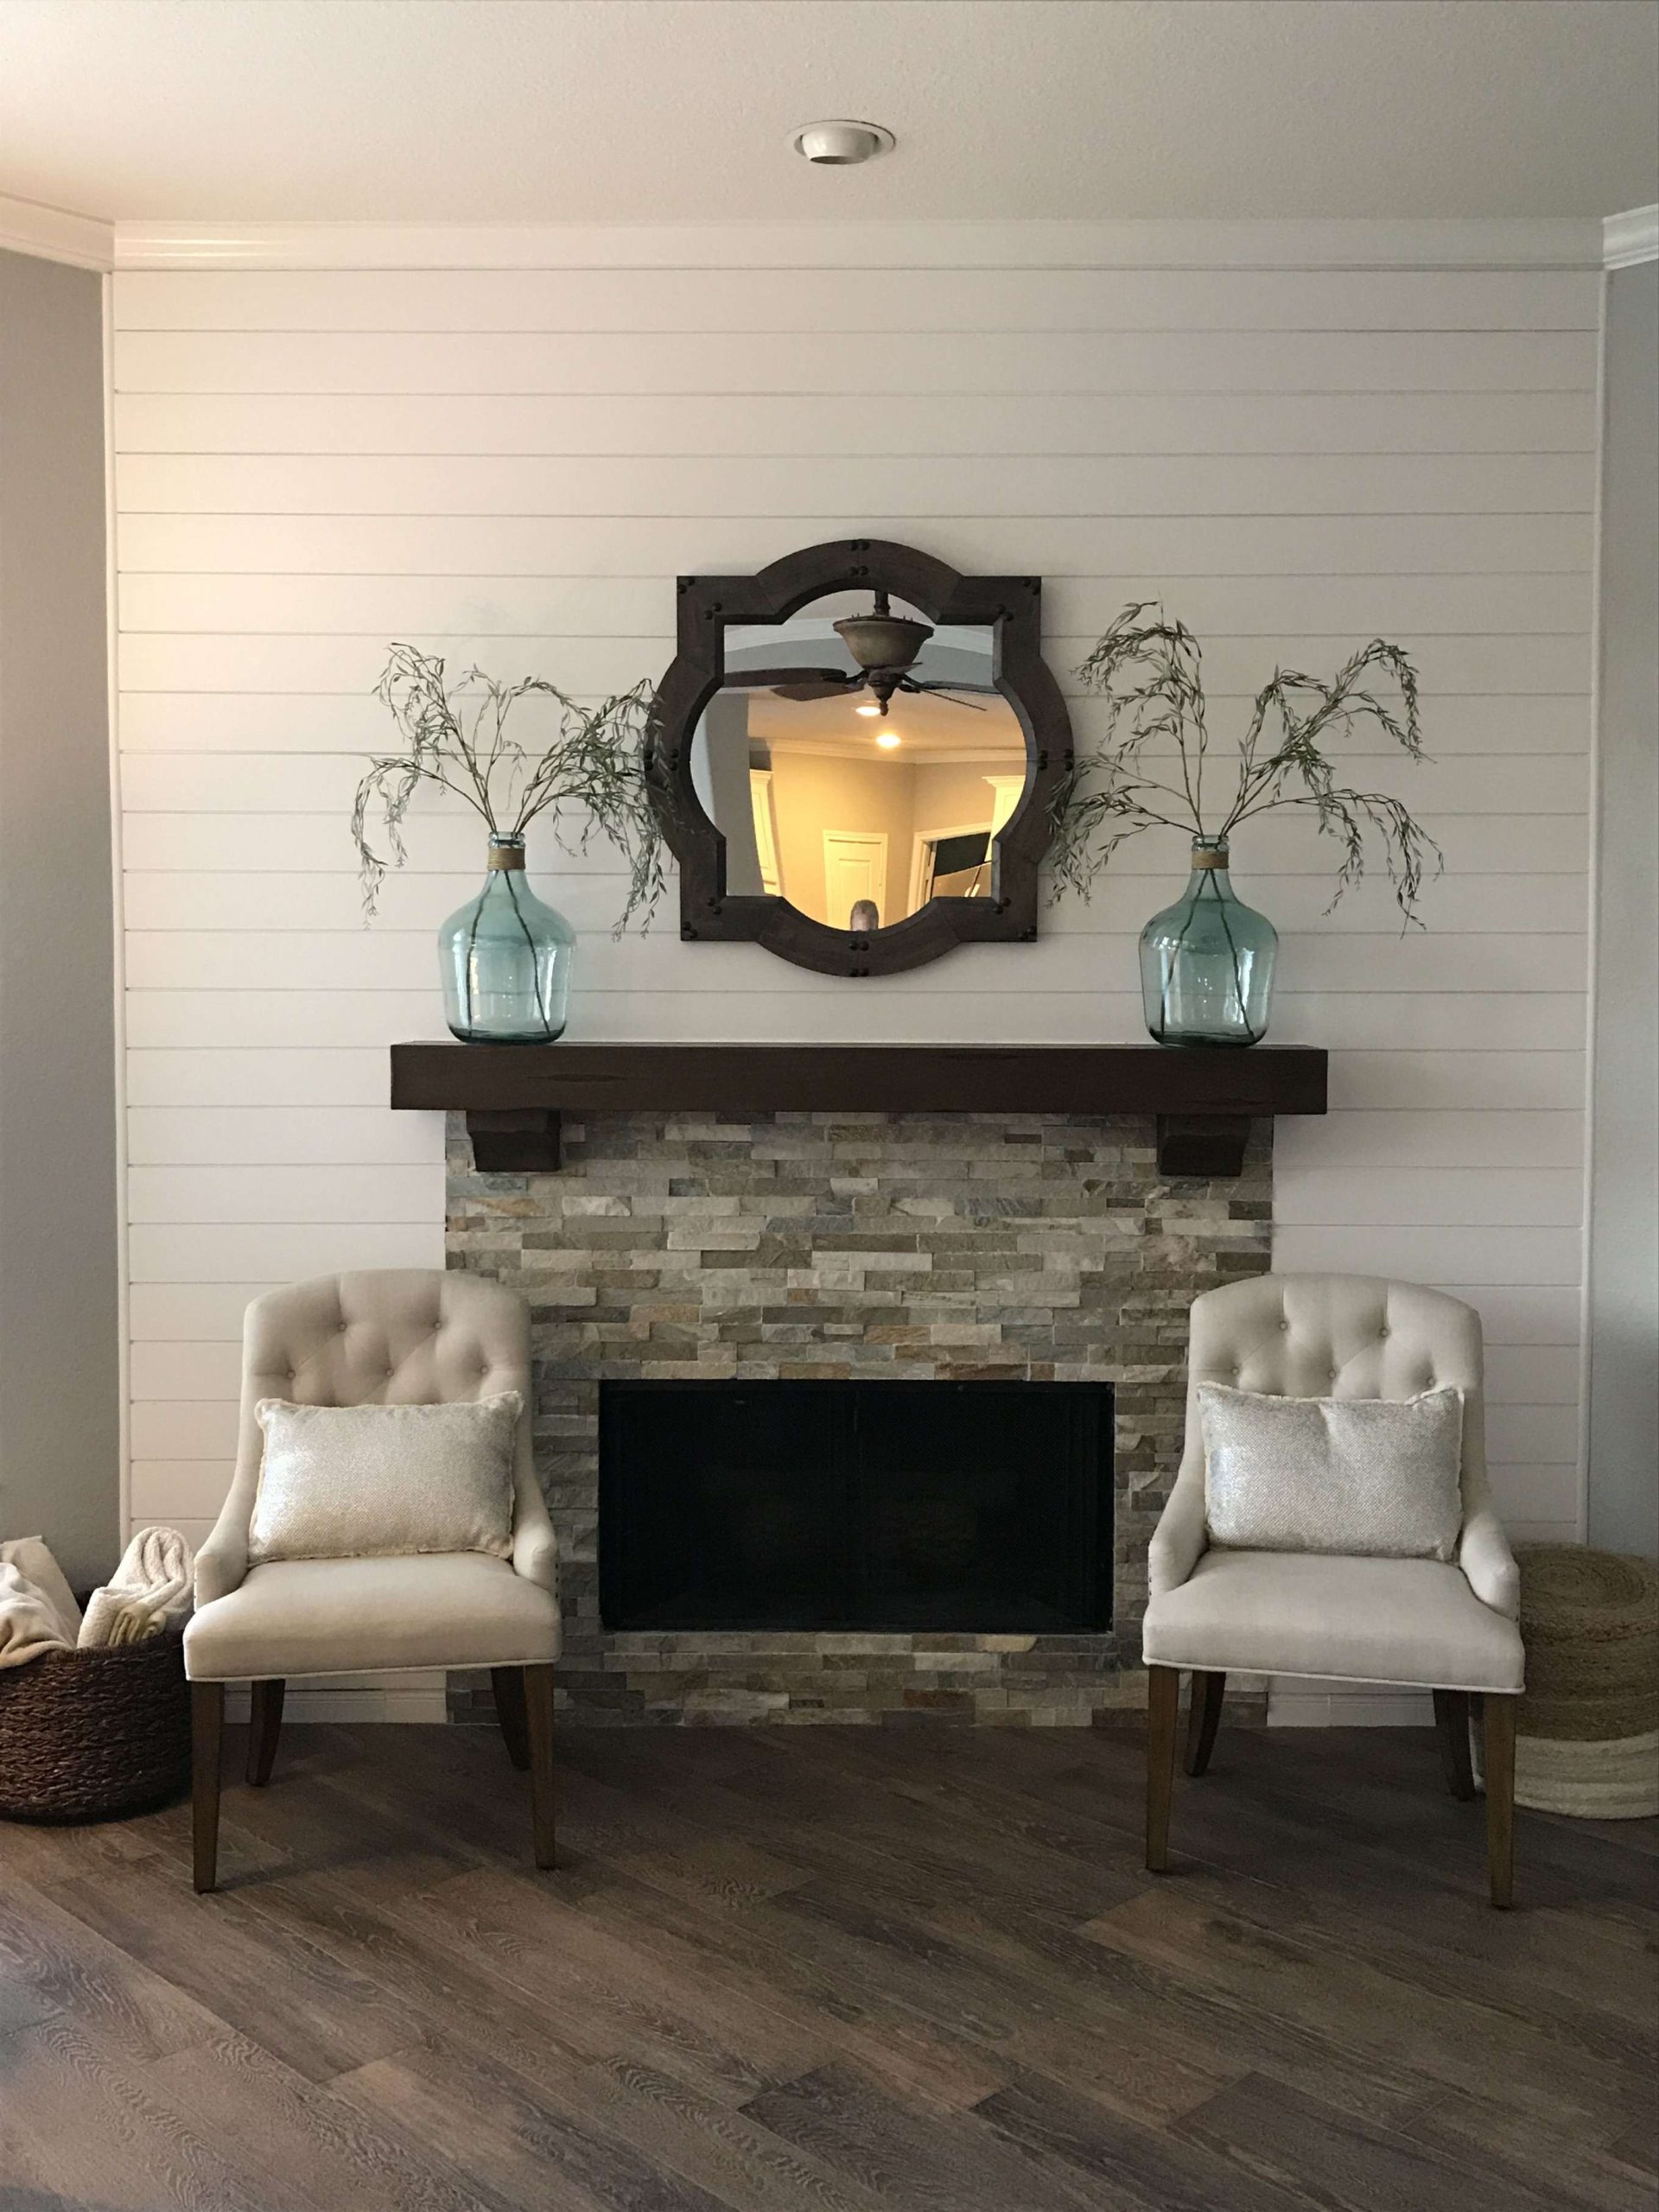 Shiplap and stacked stone fireplace  Home fireplace, Living room